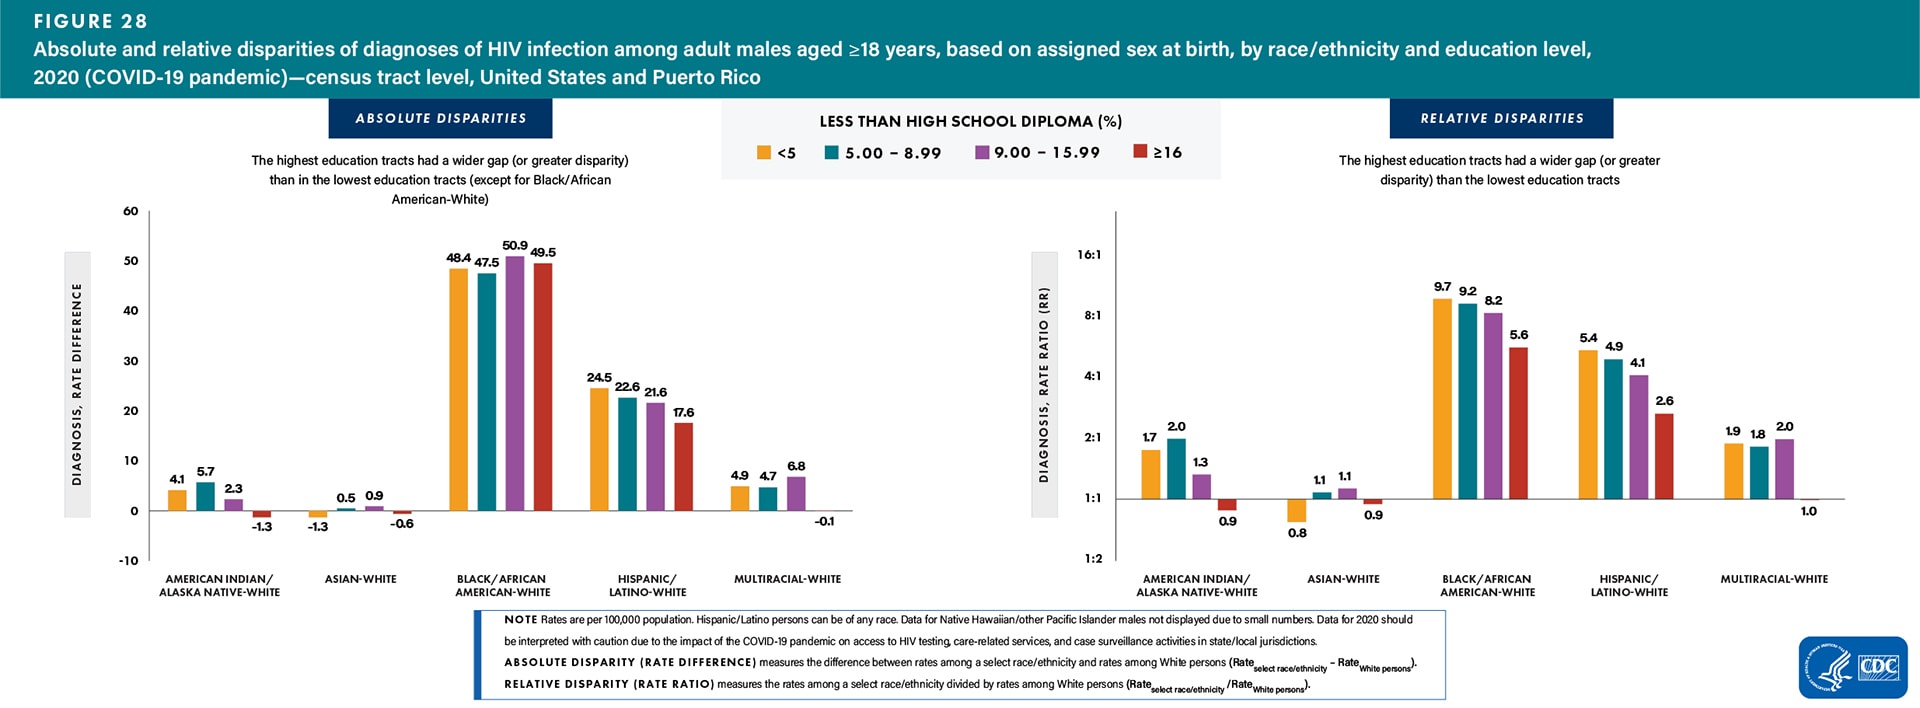 For absolute disparities, the highest education tracts had a wider gap (or greater disparity) than in the lowest education tracts (except for Black/African American-White). For relative disparities, the highest education tracts had a wider gap (or greater disparity) than in the lowest education tracts.